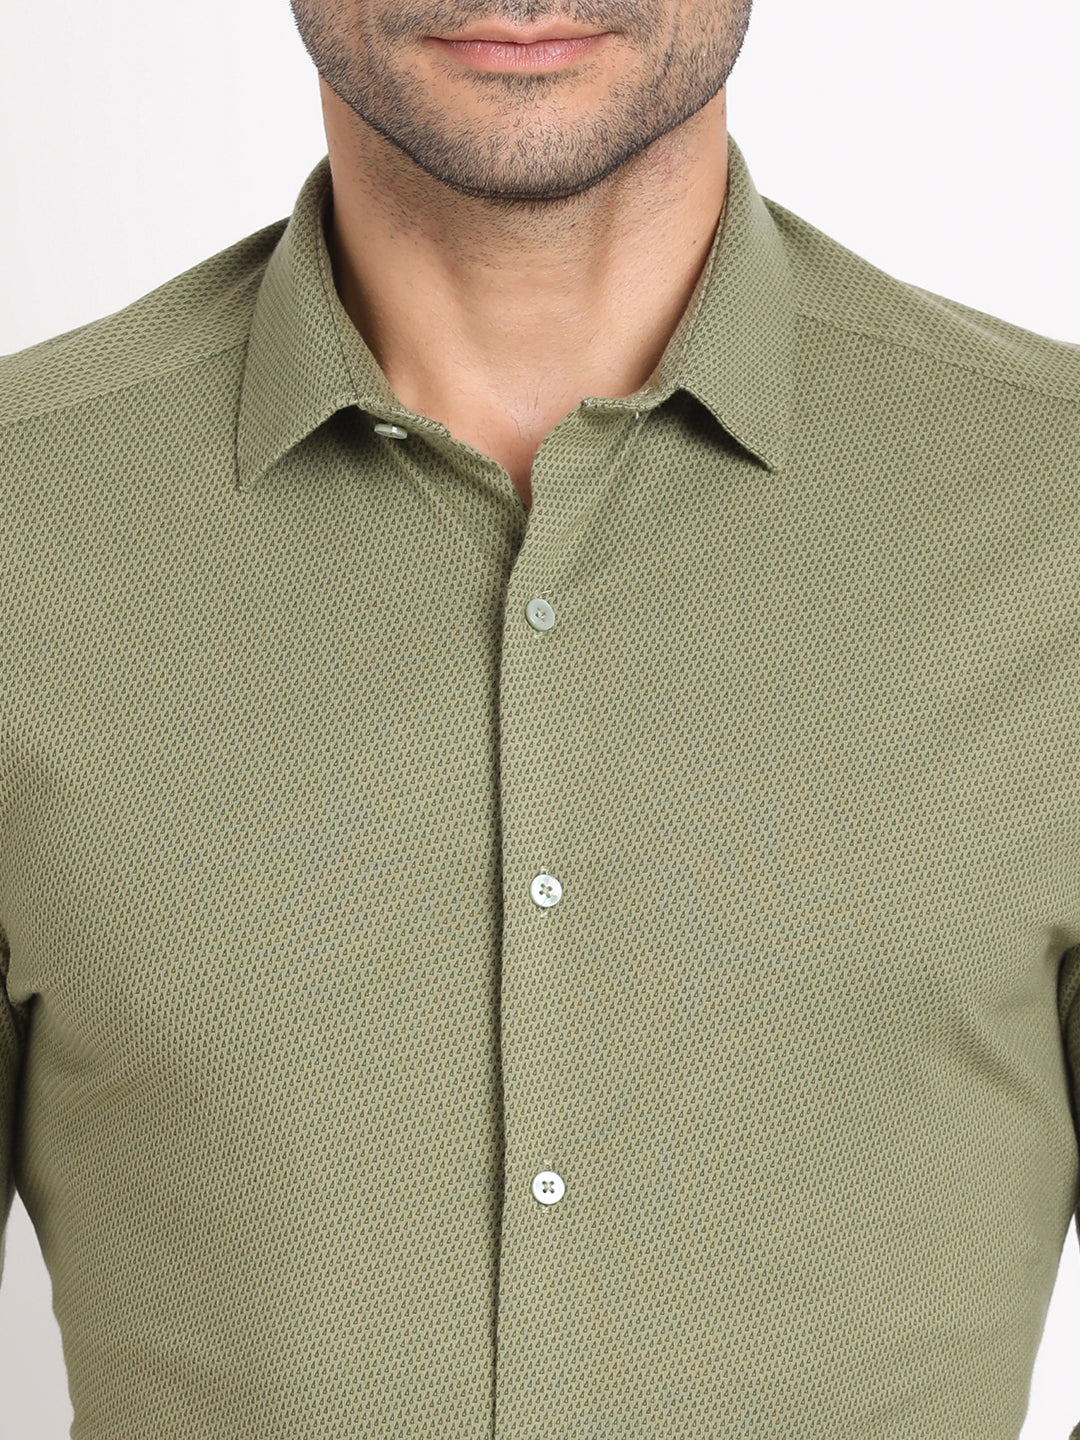 Knitted Green Printed Slim Fit Full Sleeve Formal Shirt